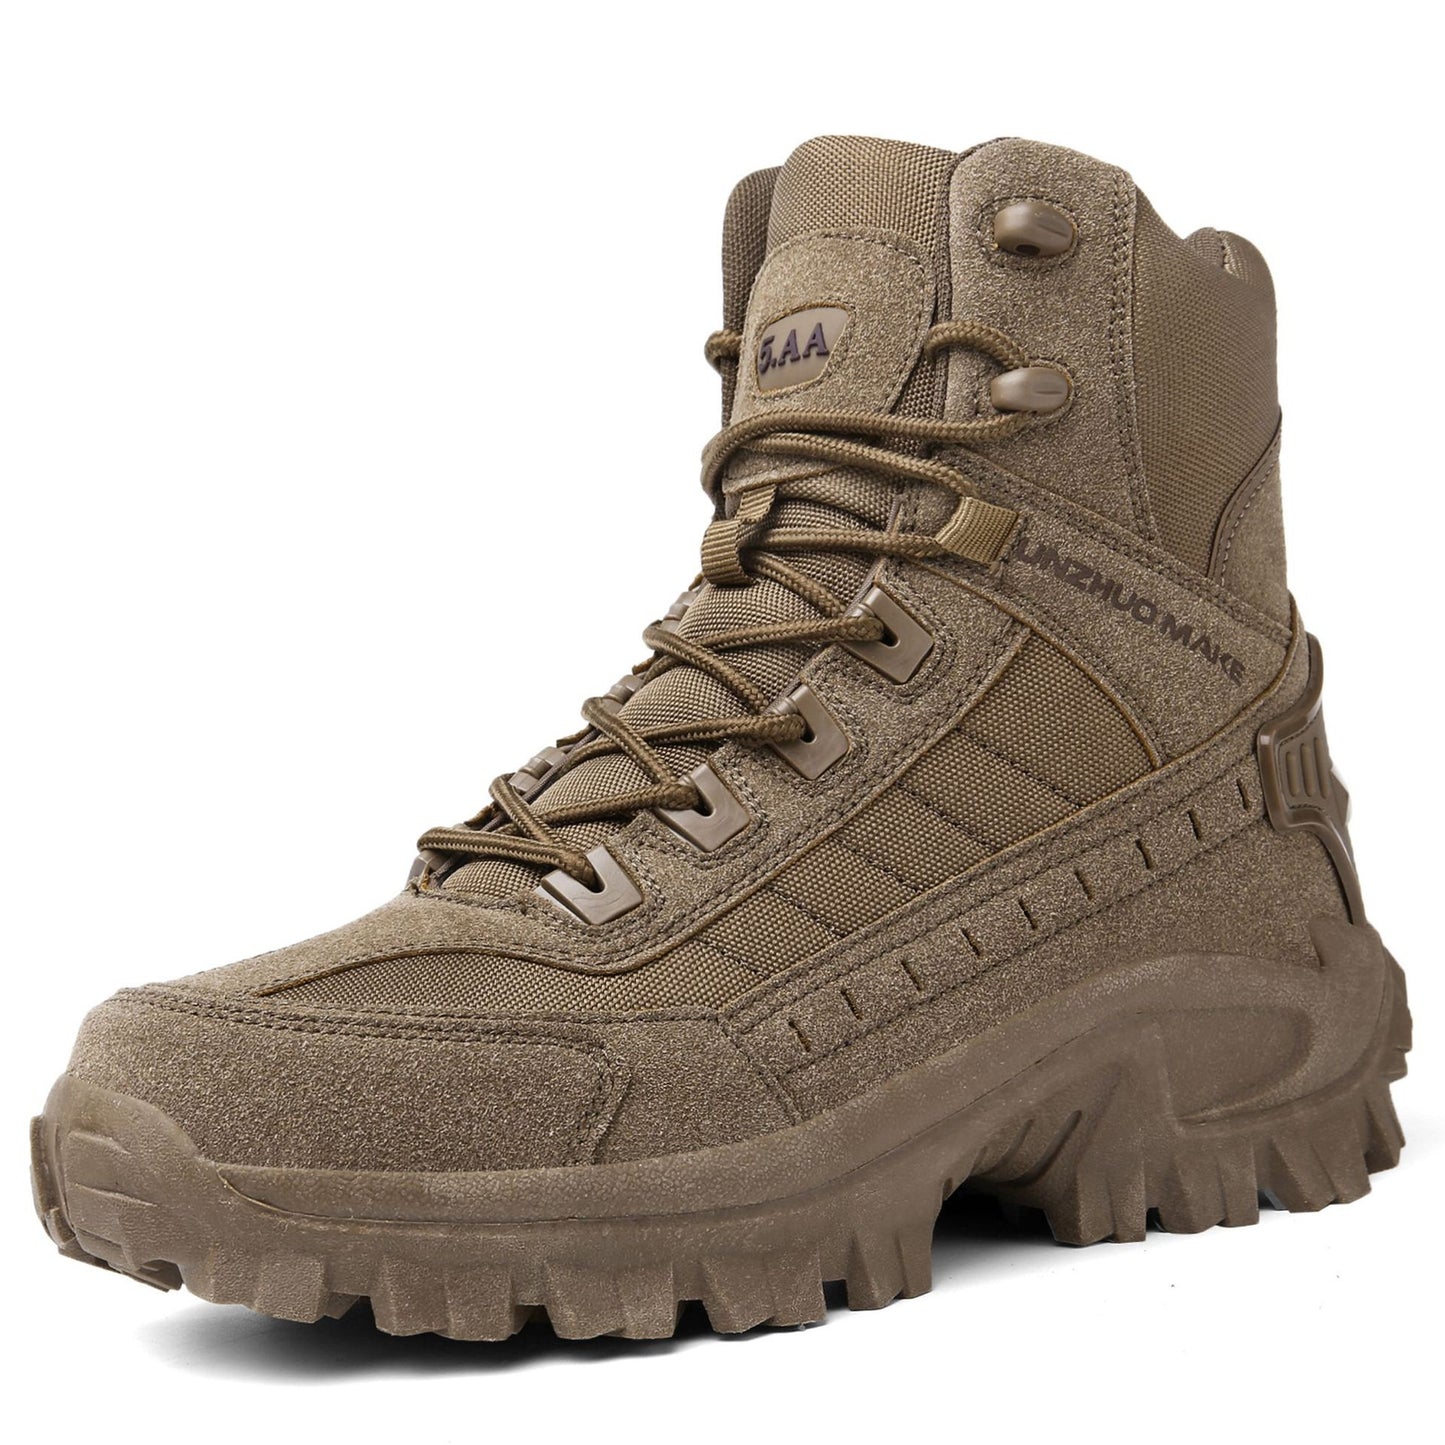 NS Unzhuo Tactical Boots